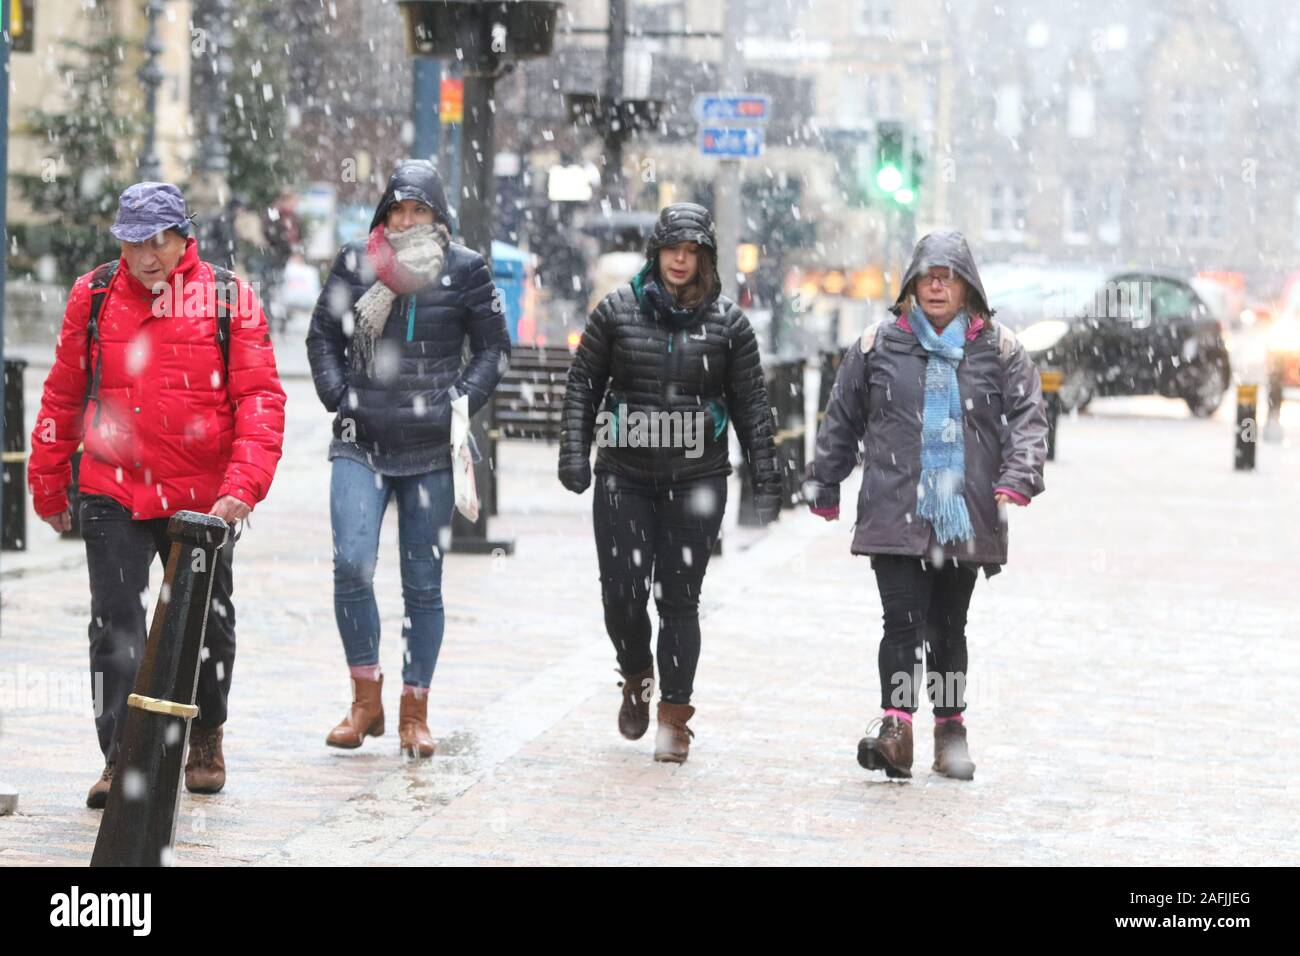 Inverness, UK. 16th Dec, 2019. Snow in Inverness town centre. Credit: Andrew Smith/Alamy Live News Stock Photo